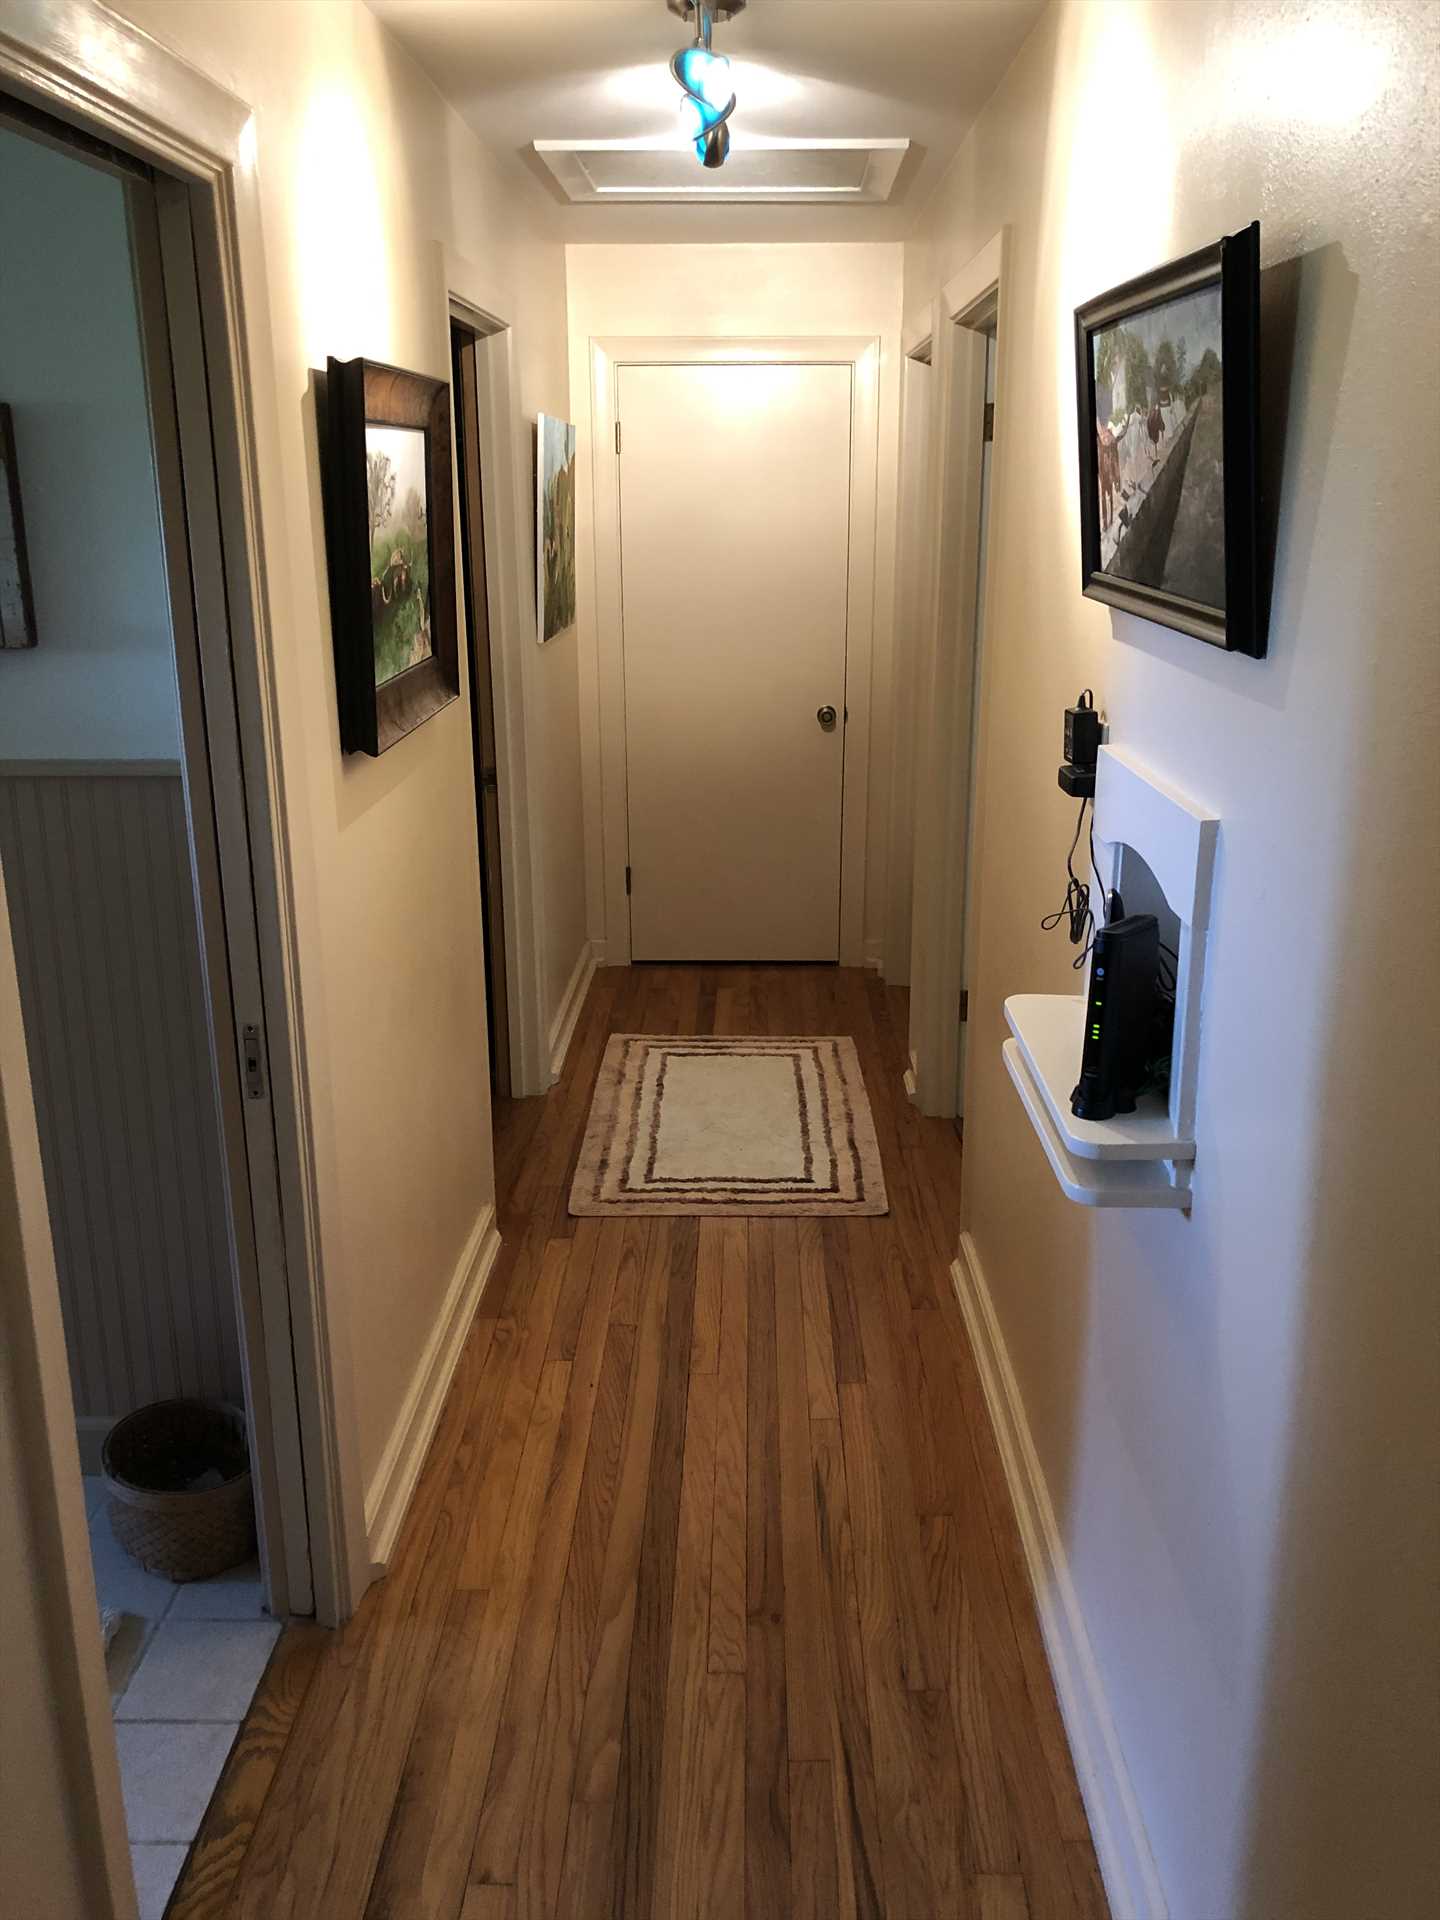                                                 Some may just see a hallway, but we see rich woodwork, framed pictures, and an area rug-special extras you won't find just anywhere!